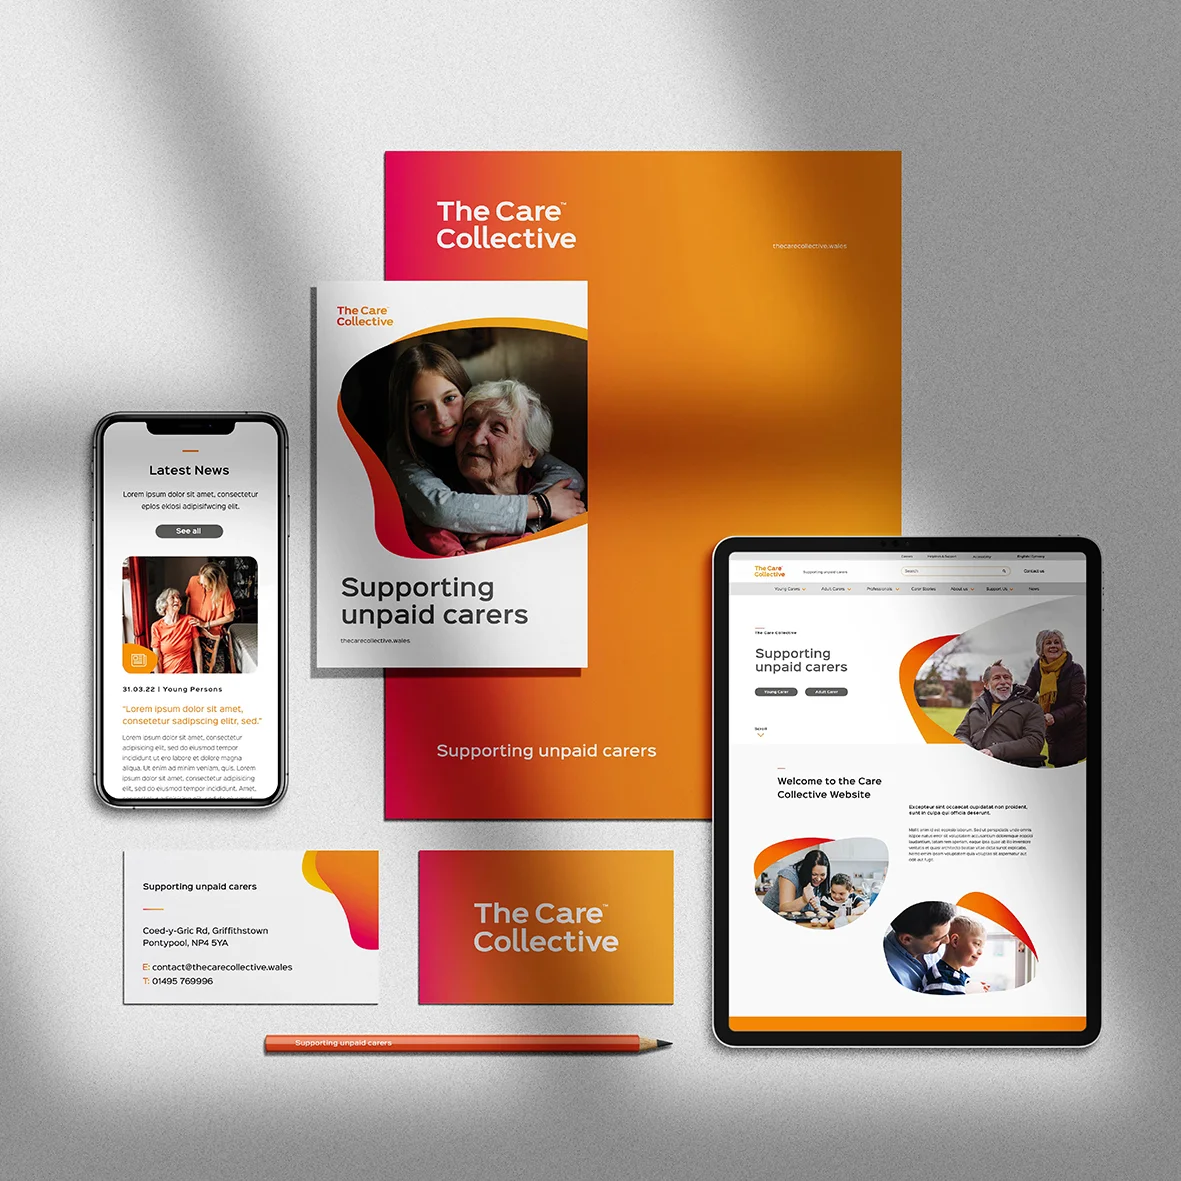 A collection of promotional materials for the care collective, featuring a smartphone, a tablet, brochures, and sheets updated with brand design elements and supporting information for unpaid carers.